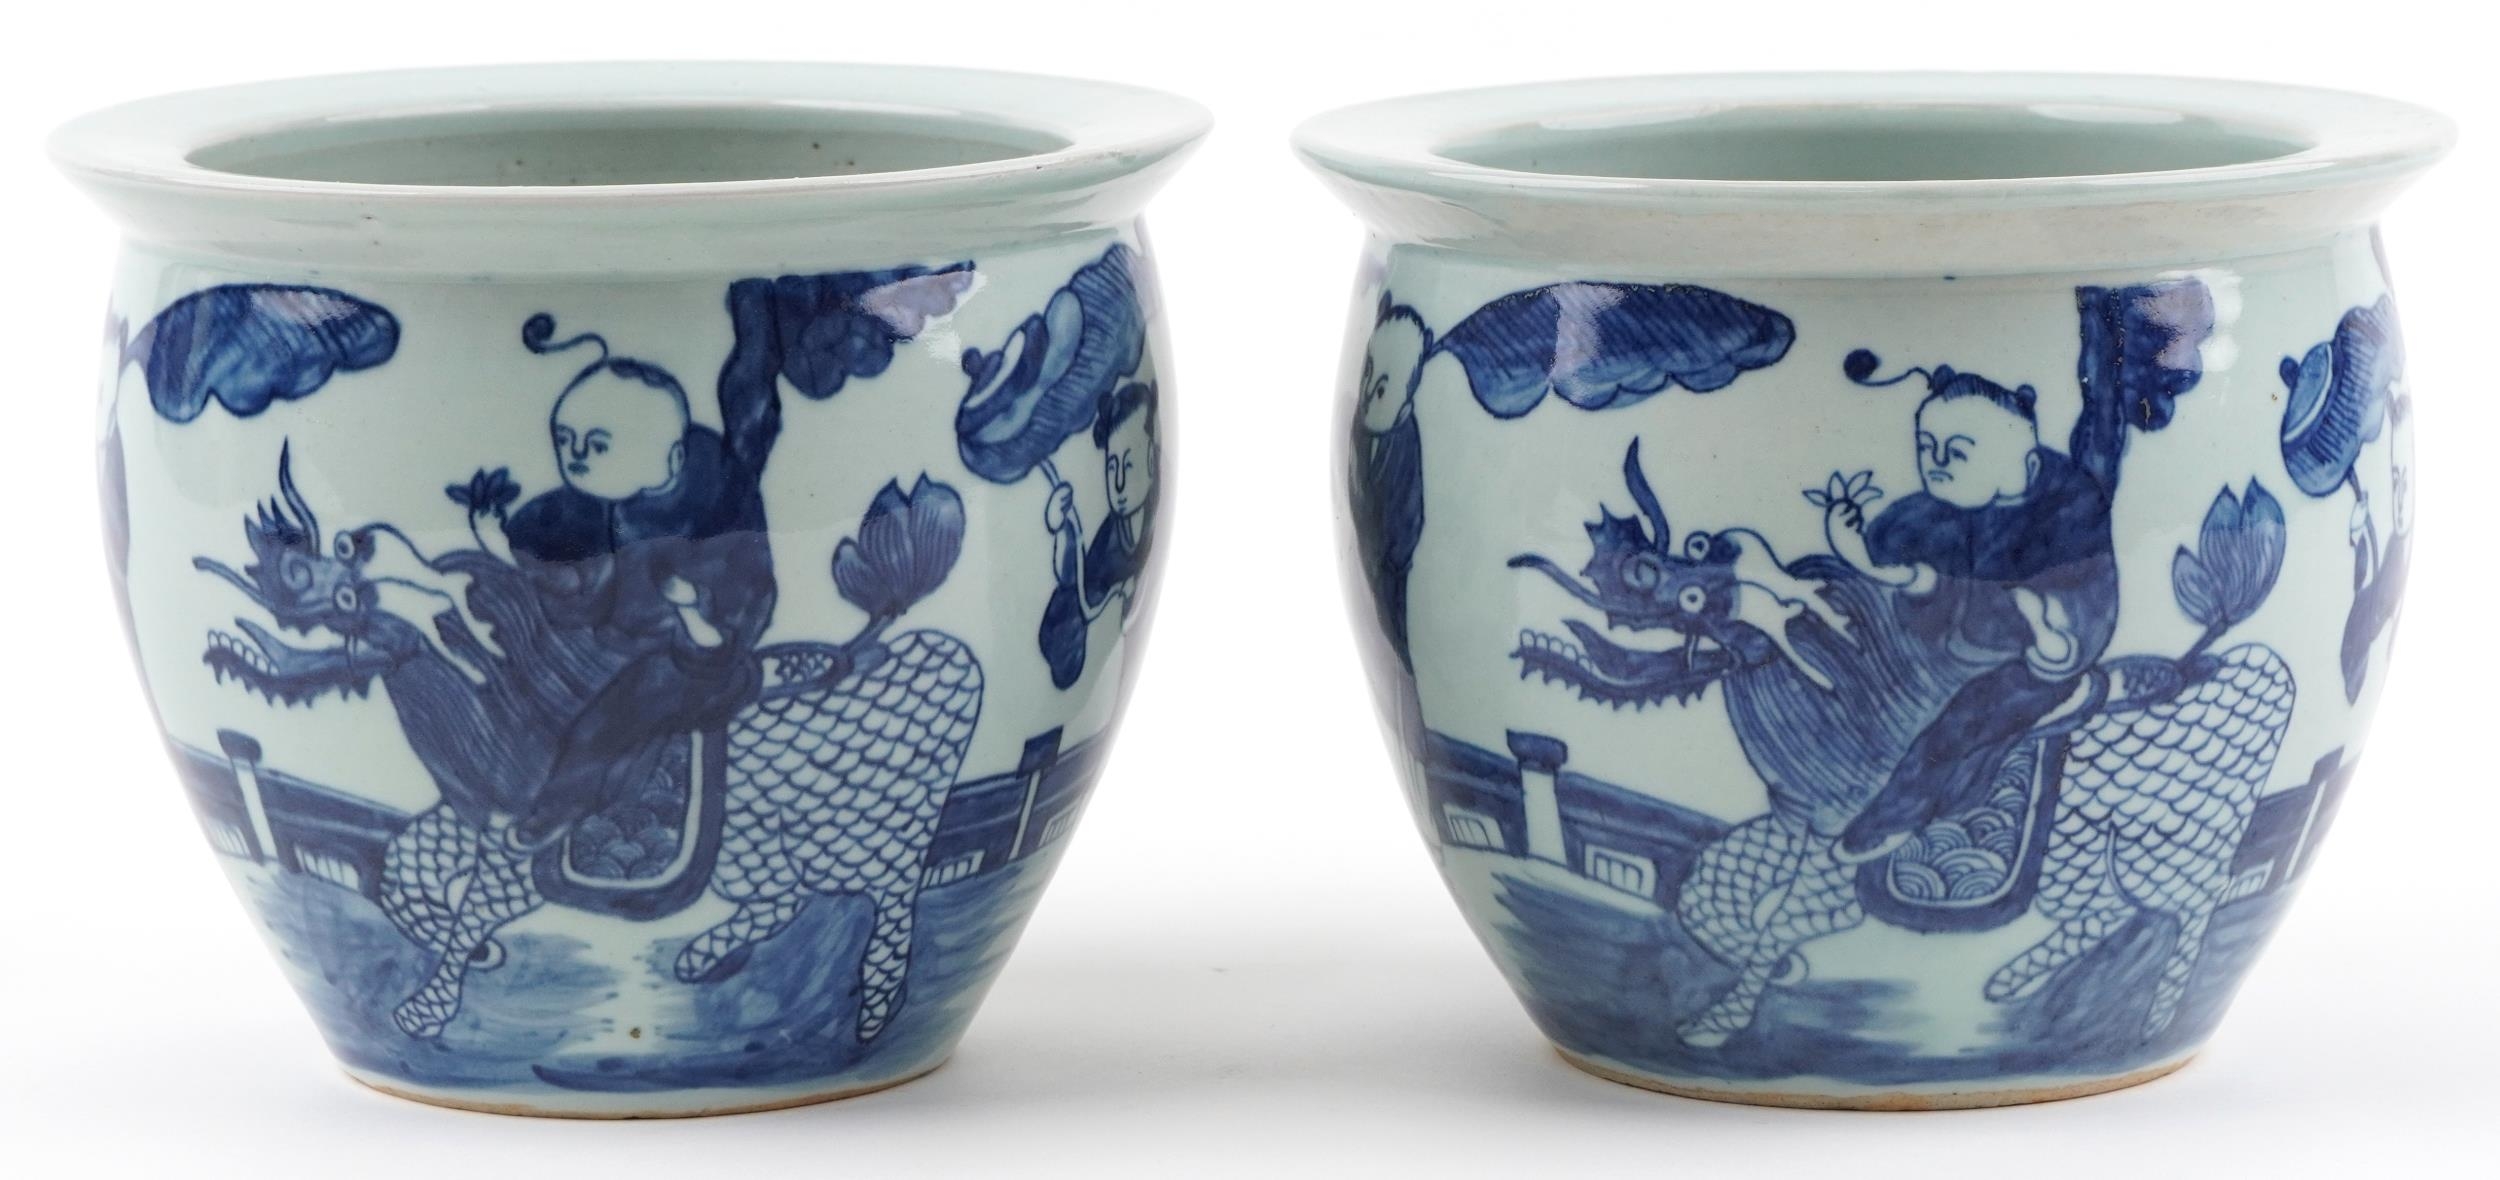 Pair of Chinese blue and white porcelain jardinieres painted with children playing in a palace